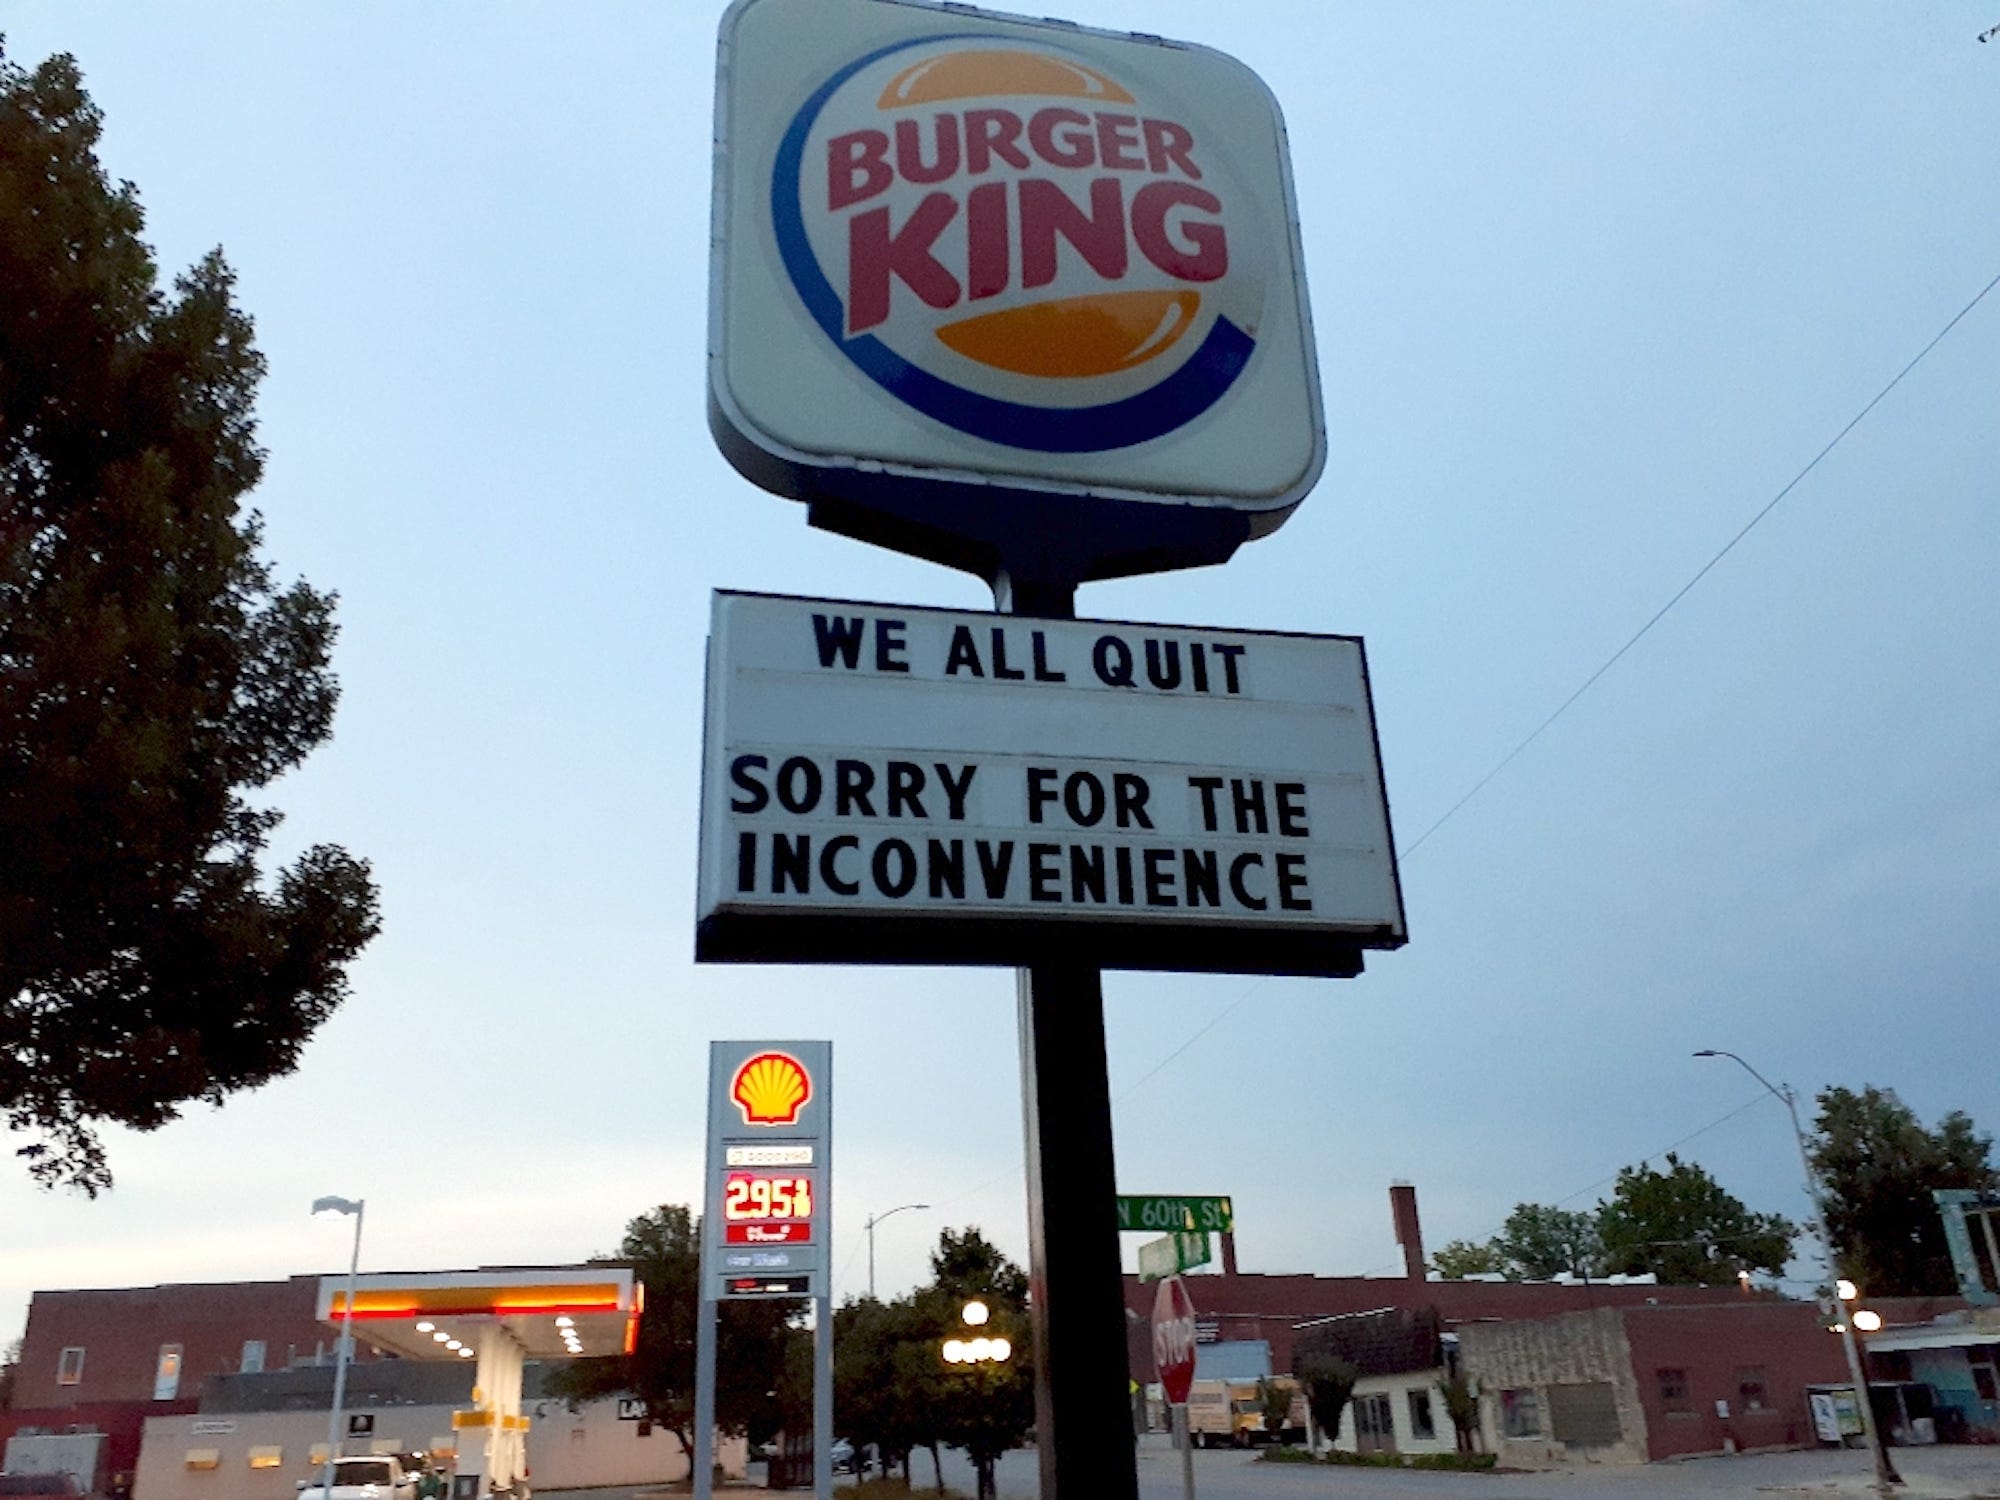 A sign reads "We all quit" at a Burger King in Nebraska